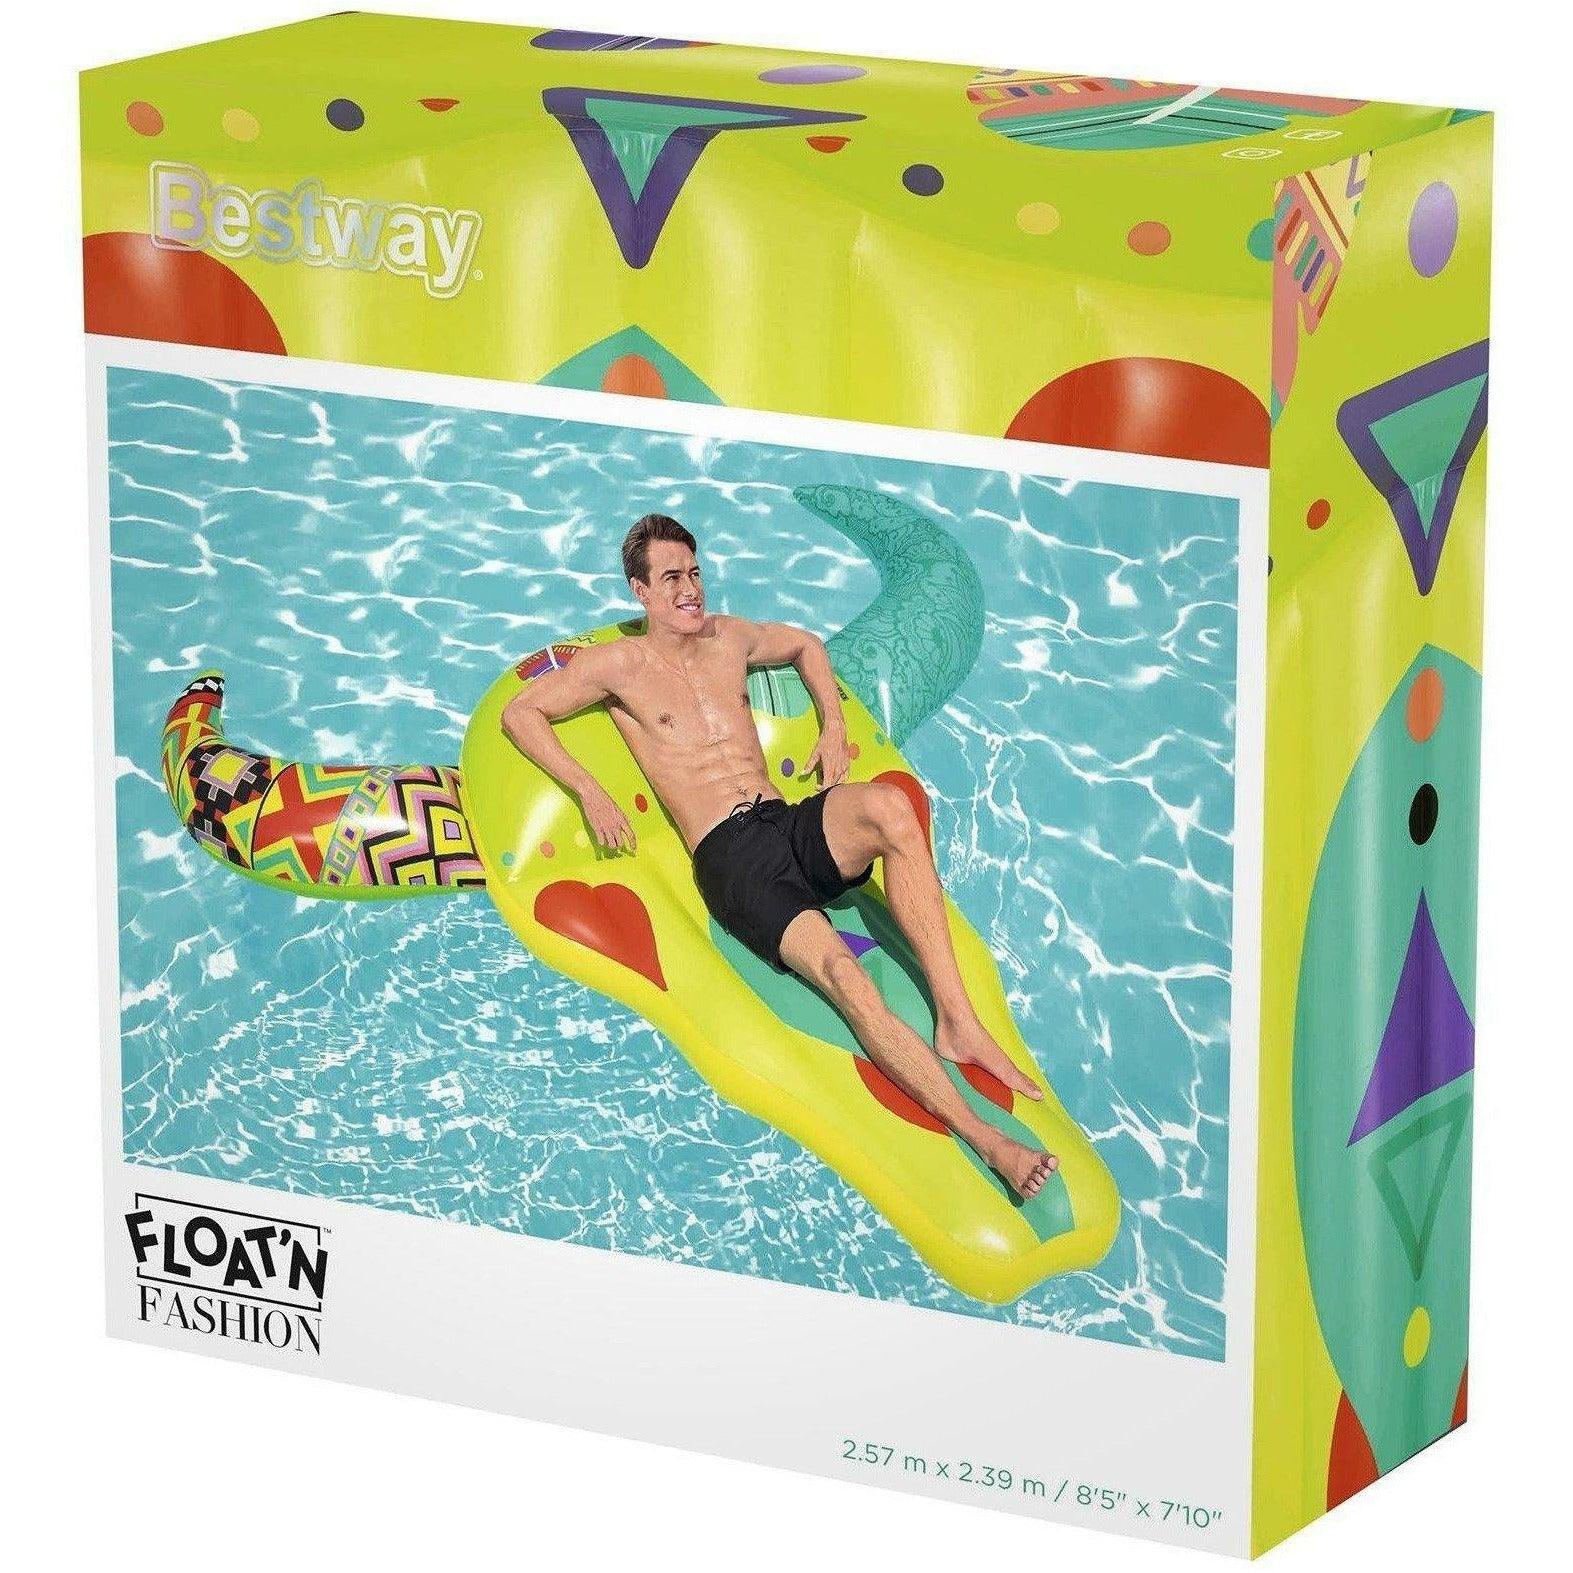 Bestway 43401 Bohemian Buffalo Pool Float 2.57m x 2.39m - BumbleToys - 8-13 Years, Boys, Eagle Plus, Floaters, Sand Toys Pools & Inflatables